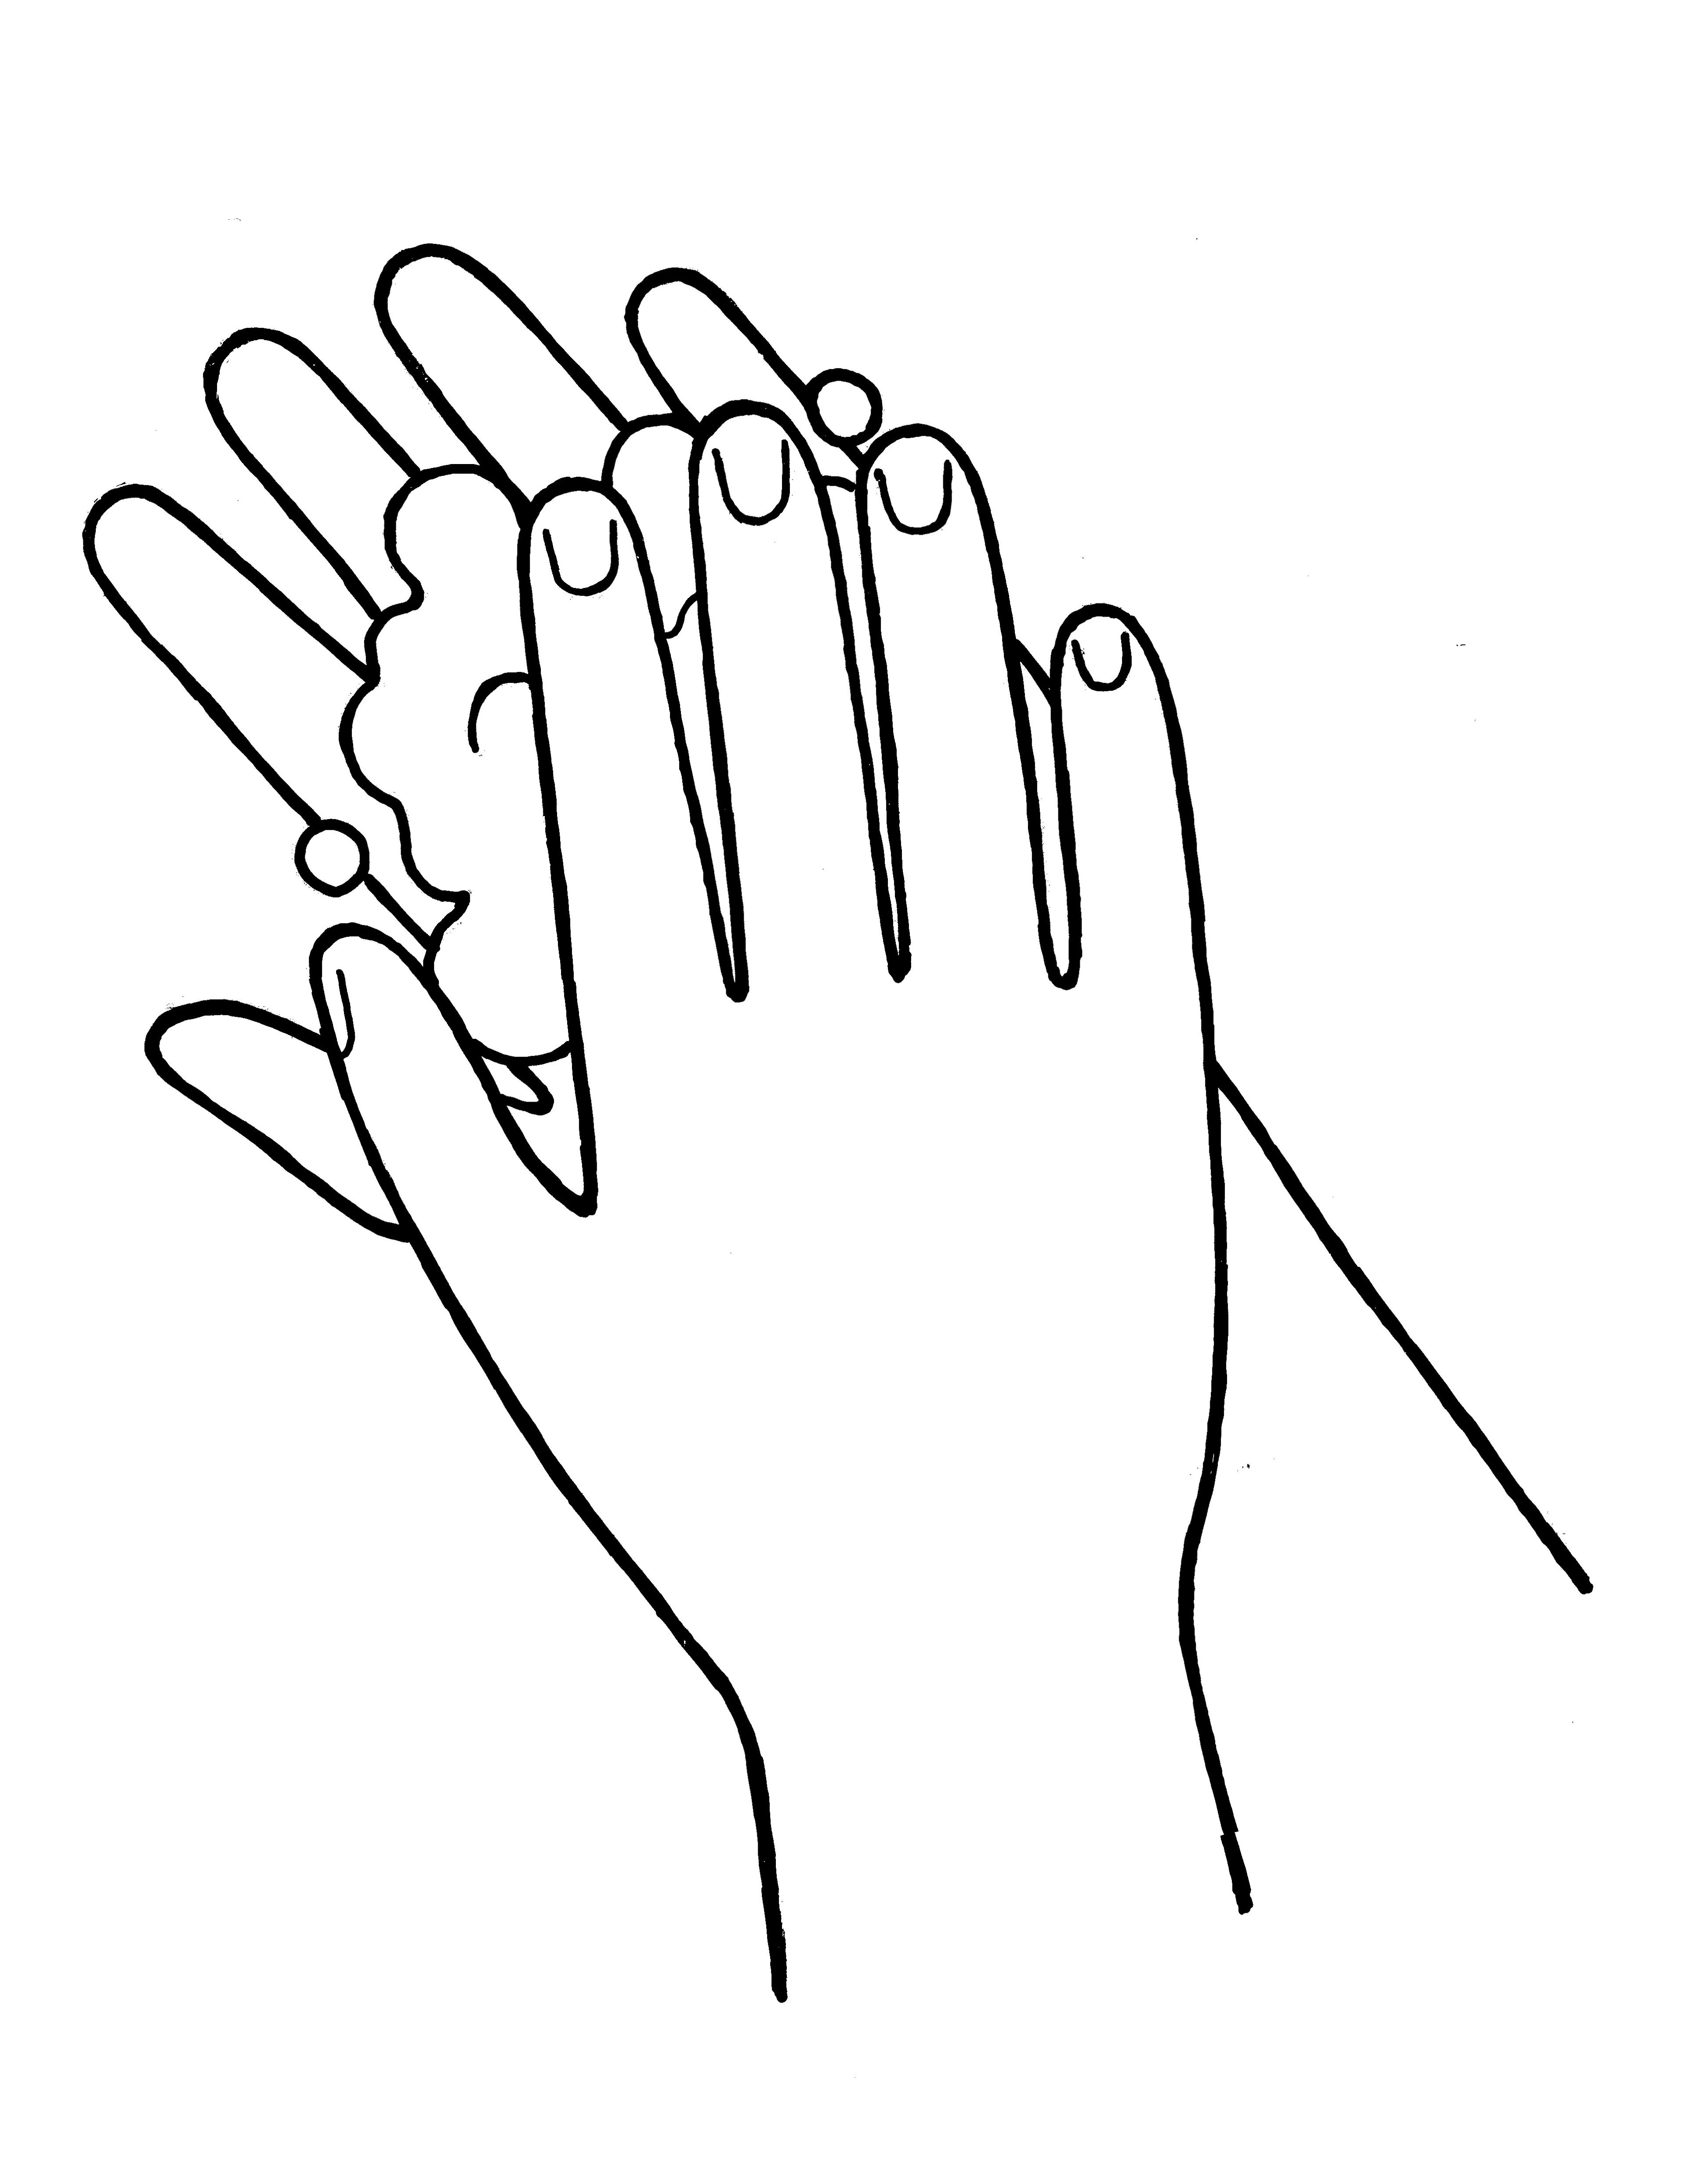 An illustration of hands lathering soap, from the nursery manual Behold Your Little Ones (2008), page 47.